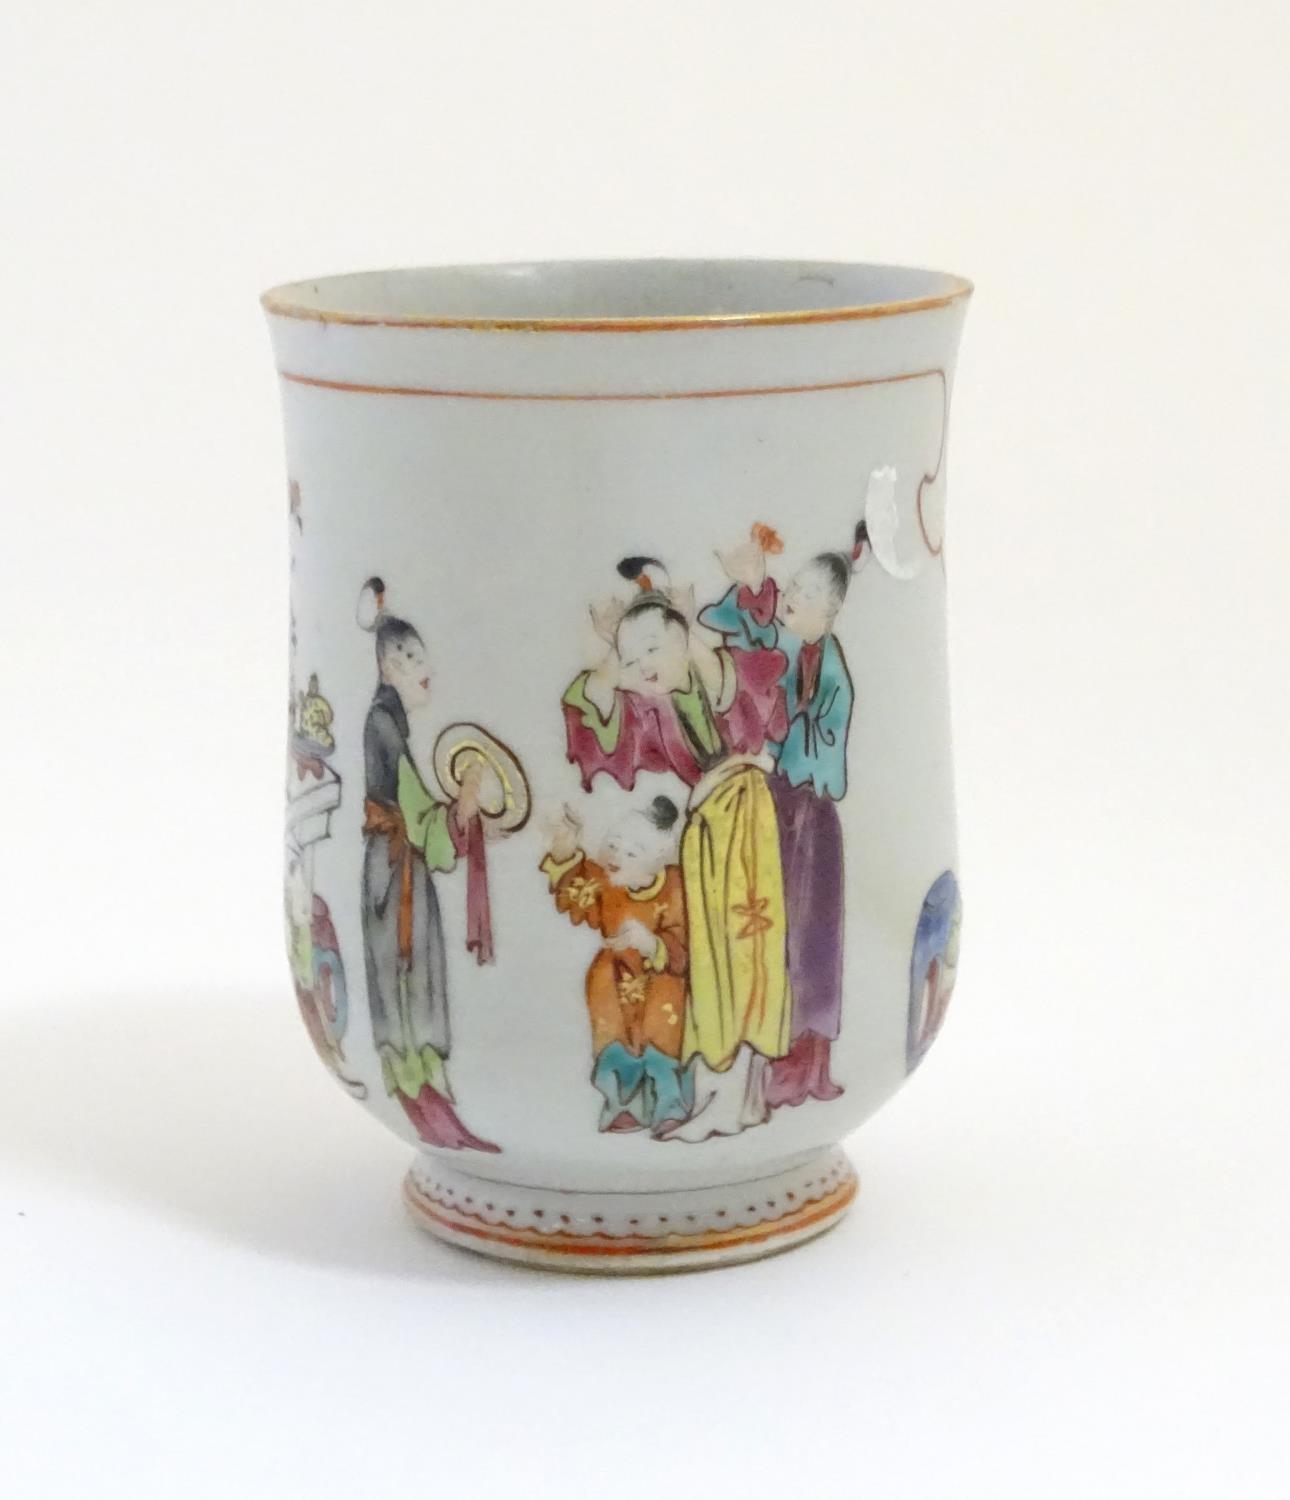 A Chinese export famille rose mug / tankard decorated with figures in a domestic interior scene, and - Image 3 of 5